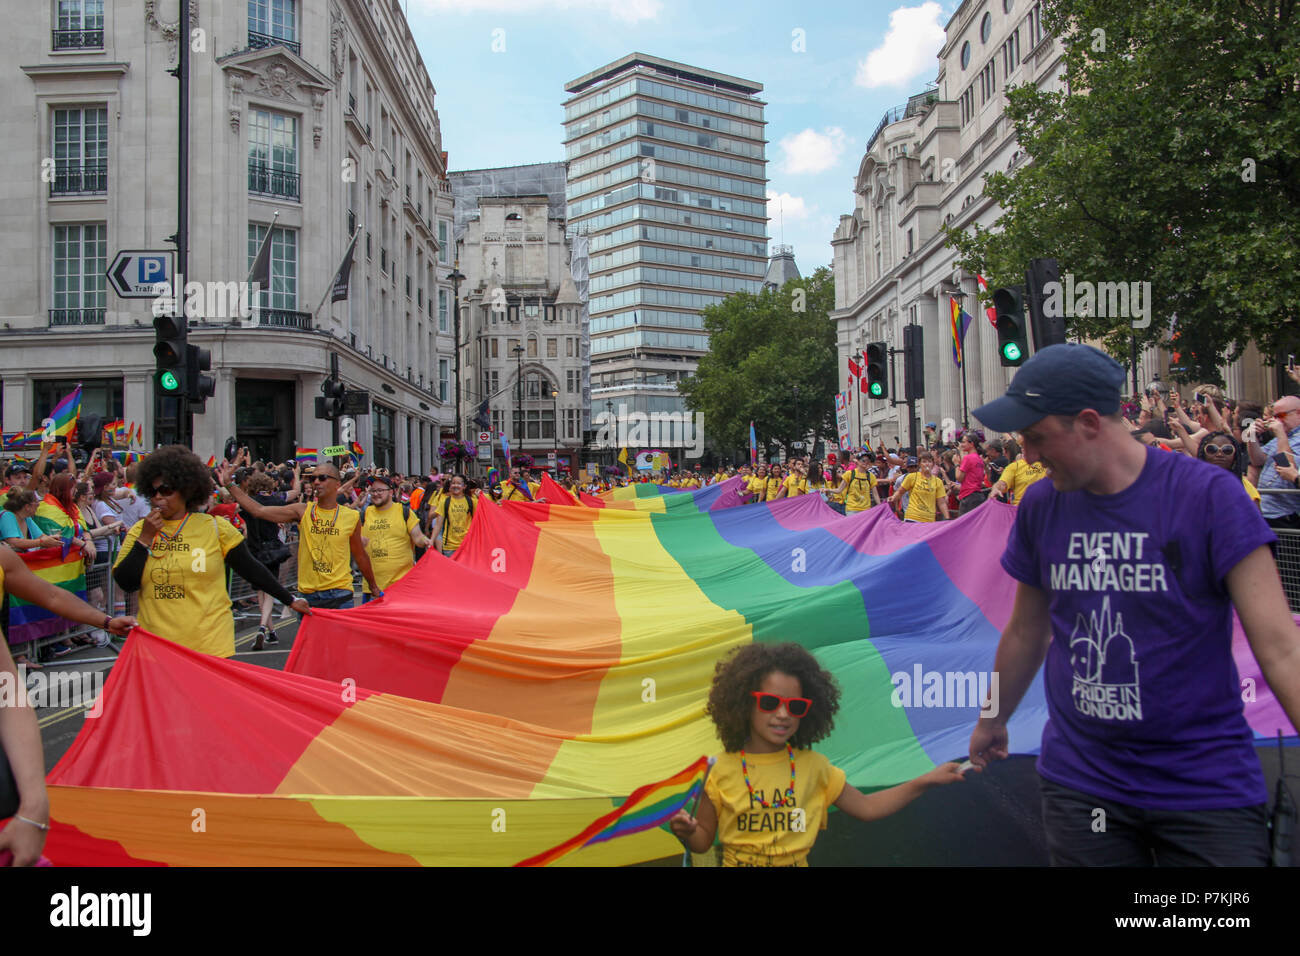 London, UK. 7th July 2018. The Rainbow flag at Pride in London Credit: Alex Cavendish/Alamy Live News Stock Photo